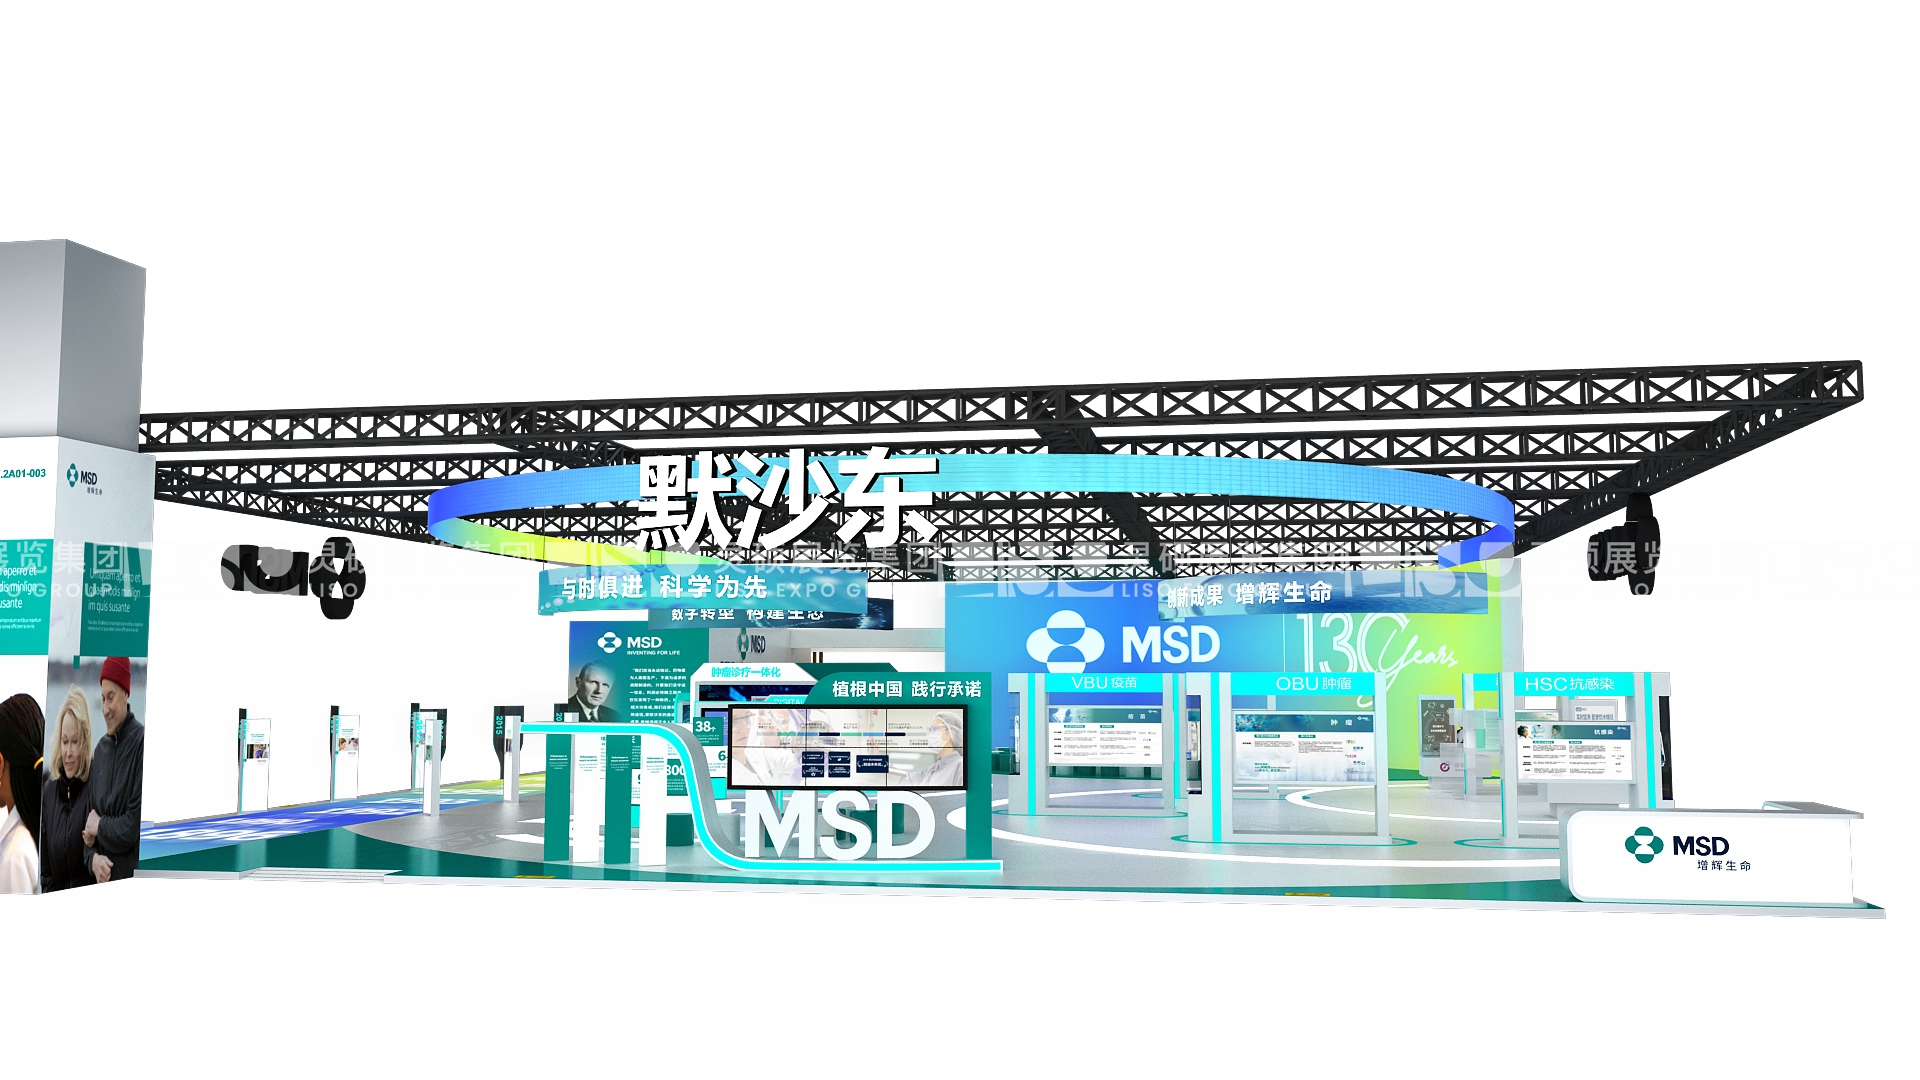 MSD-CIIE Booth Design and Construction Case